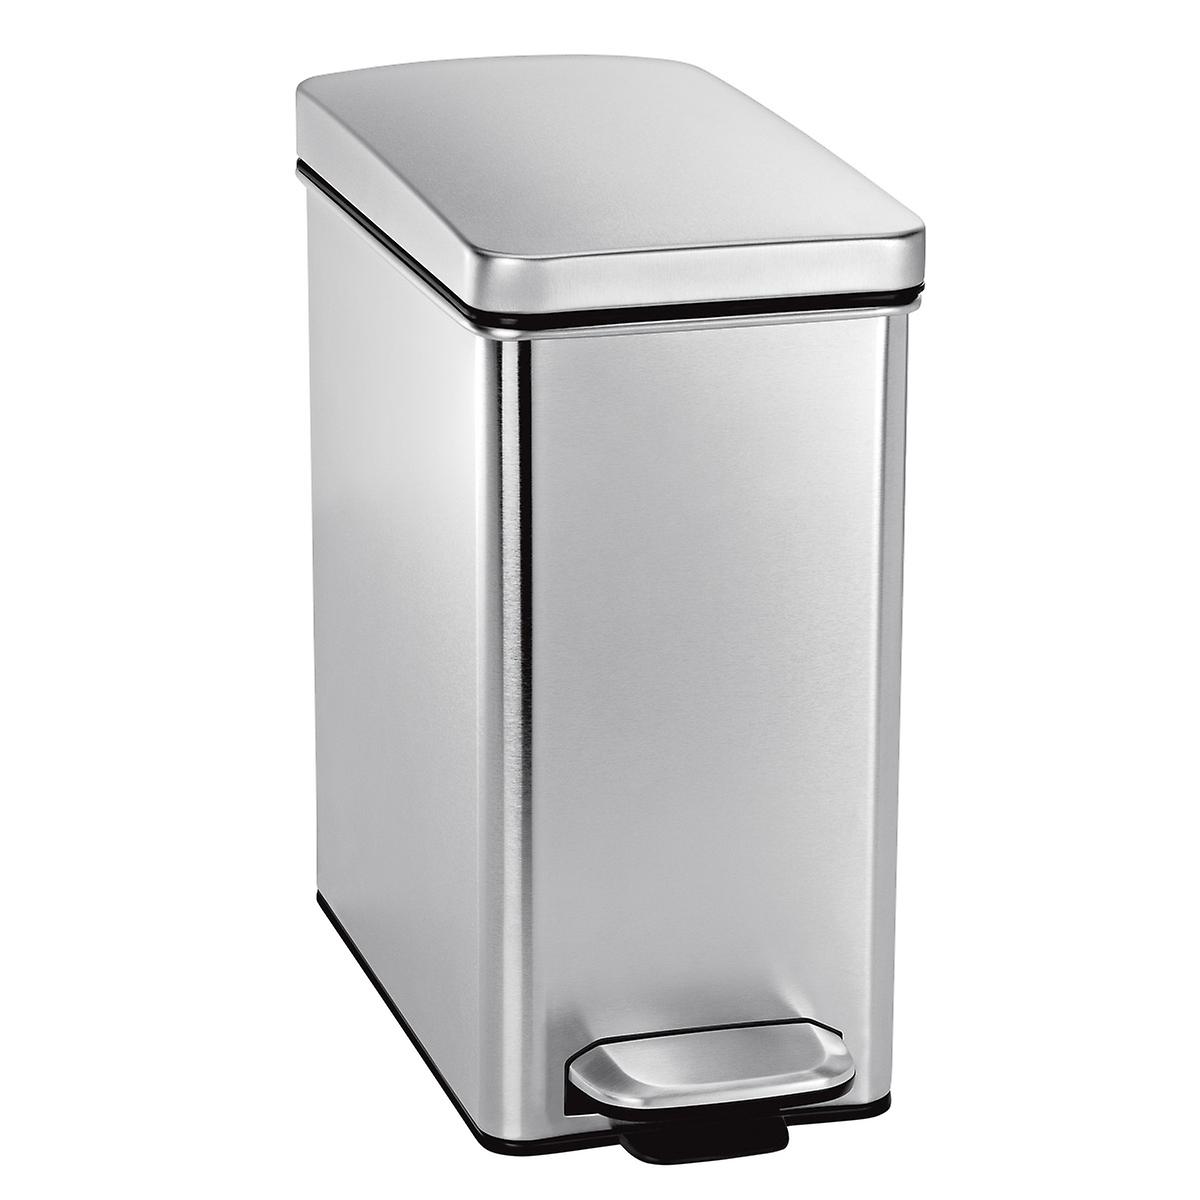 simplehuman Stainless Steel 2.6 gal. Profile Step Trash Can | The ...